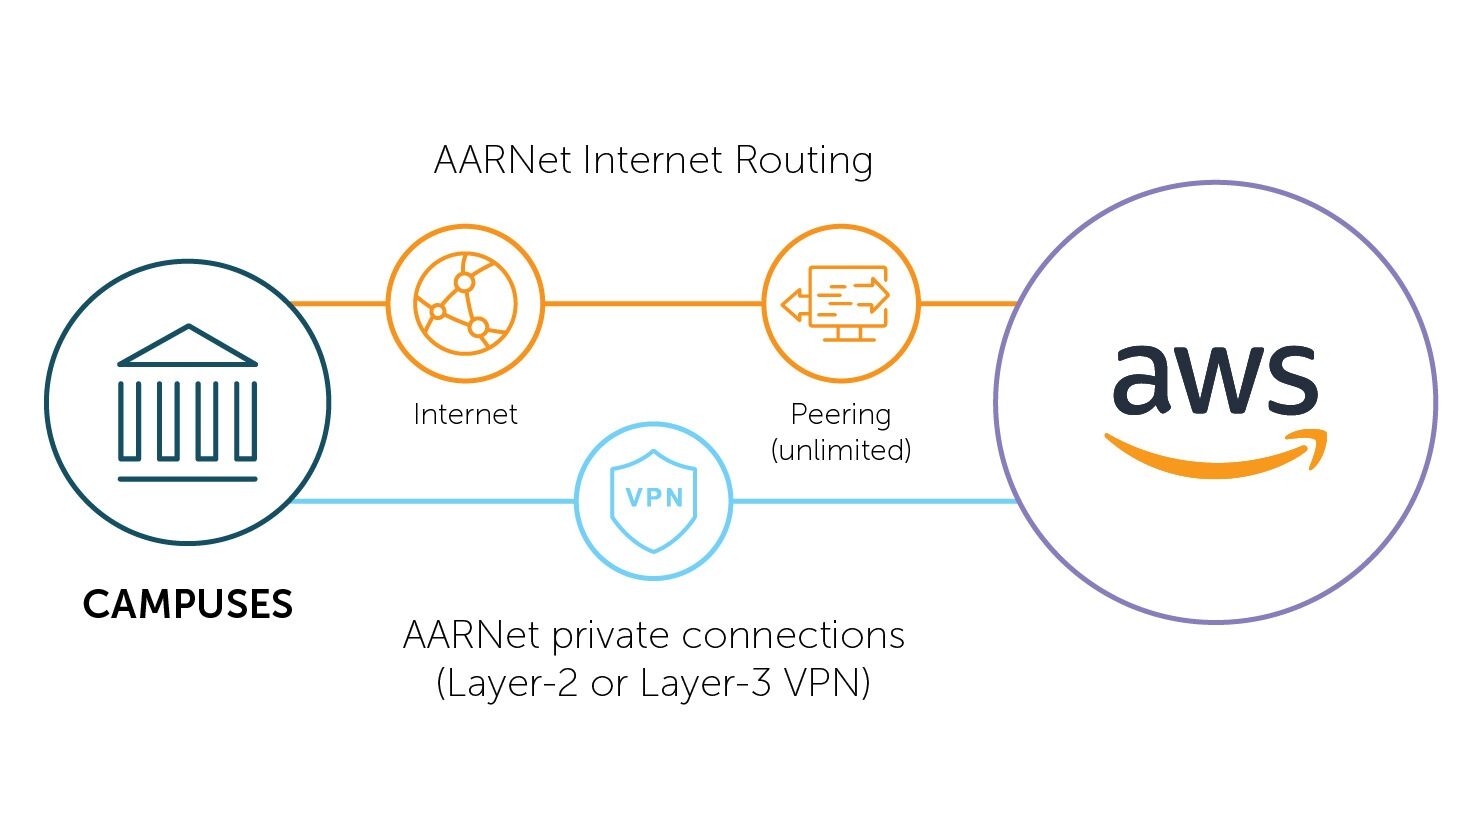 How AARNet connects your campus to Amazon Web Services (AWS) via Direct Connect